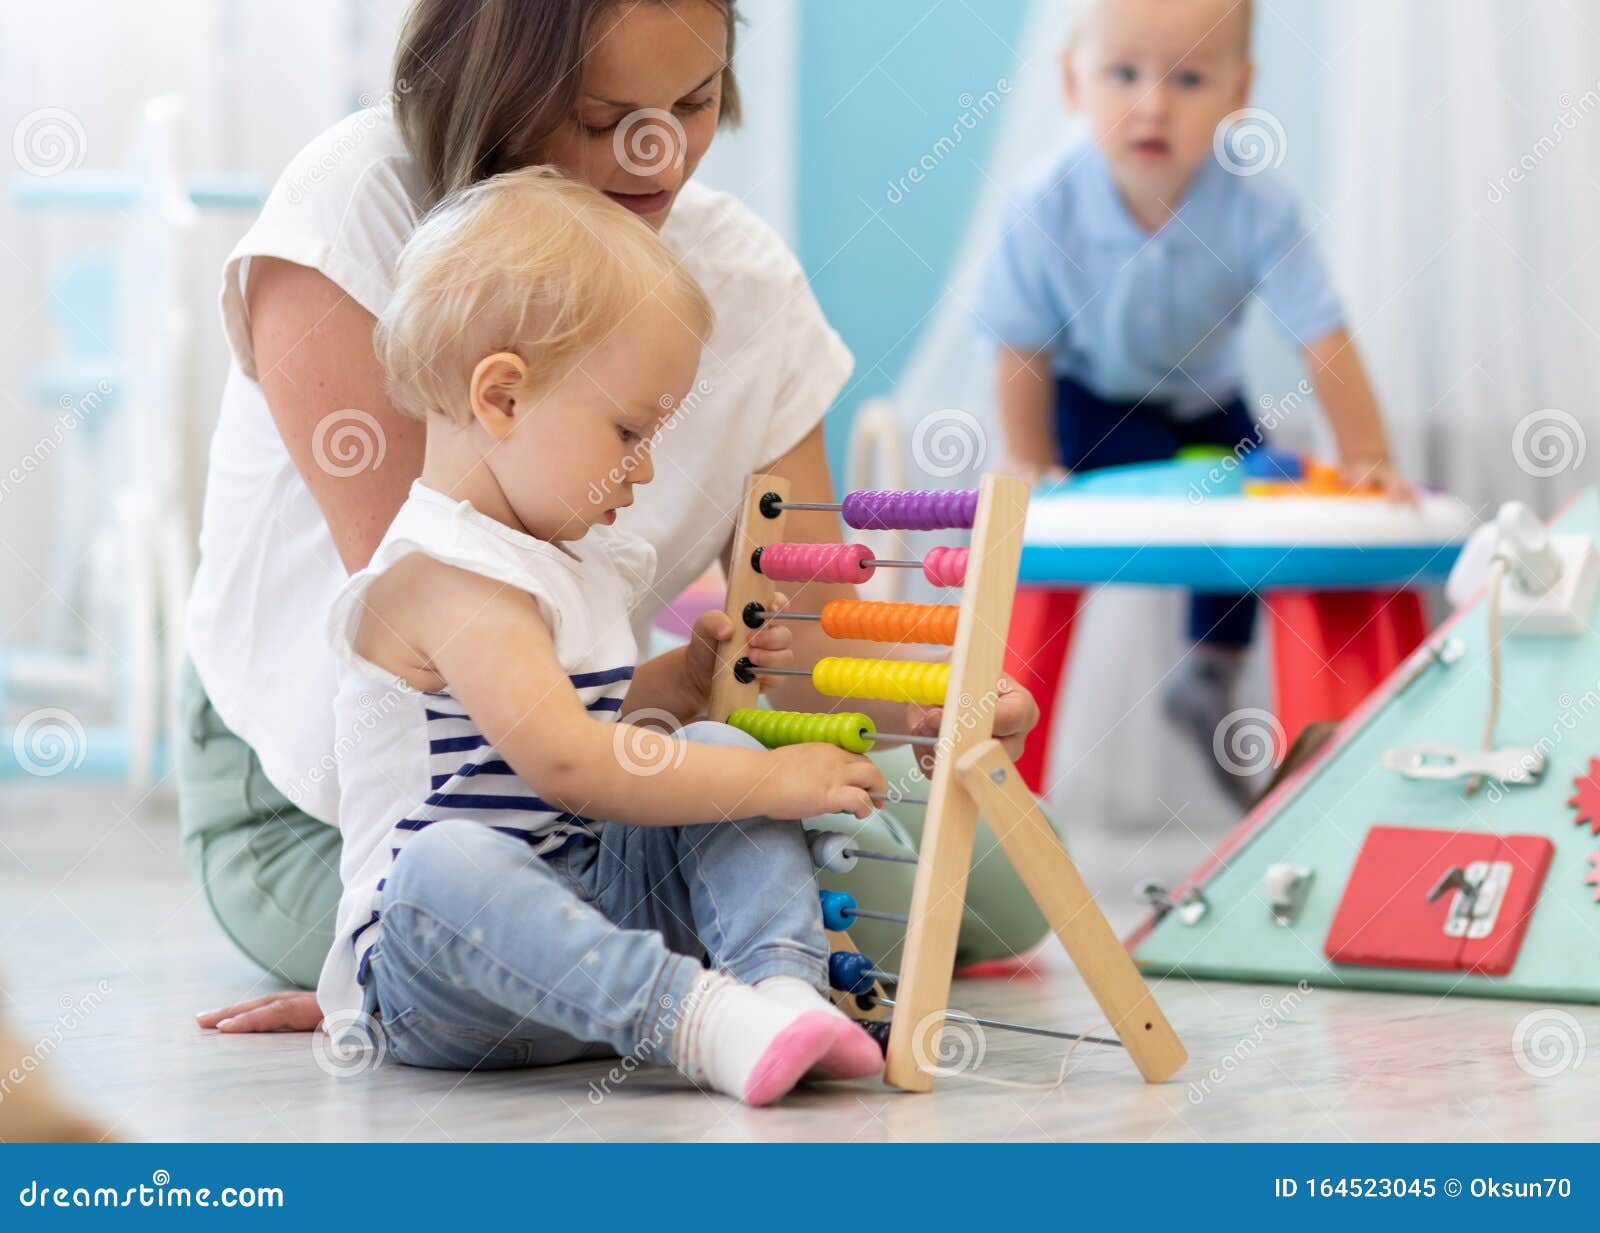 kids playing on floor with educational toys in kindergarten. children have fun in nursery or daycare. babies with